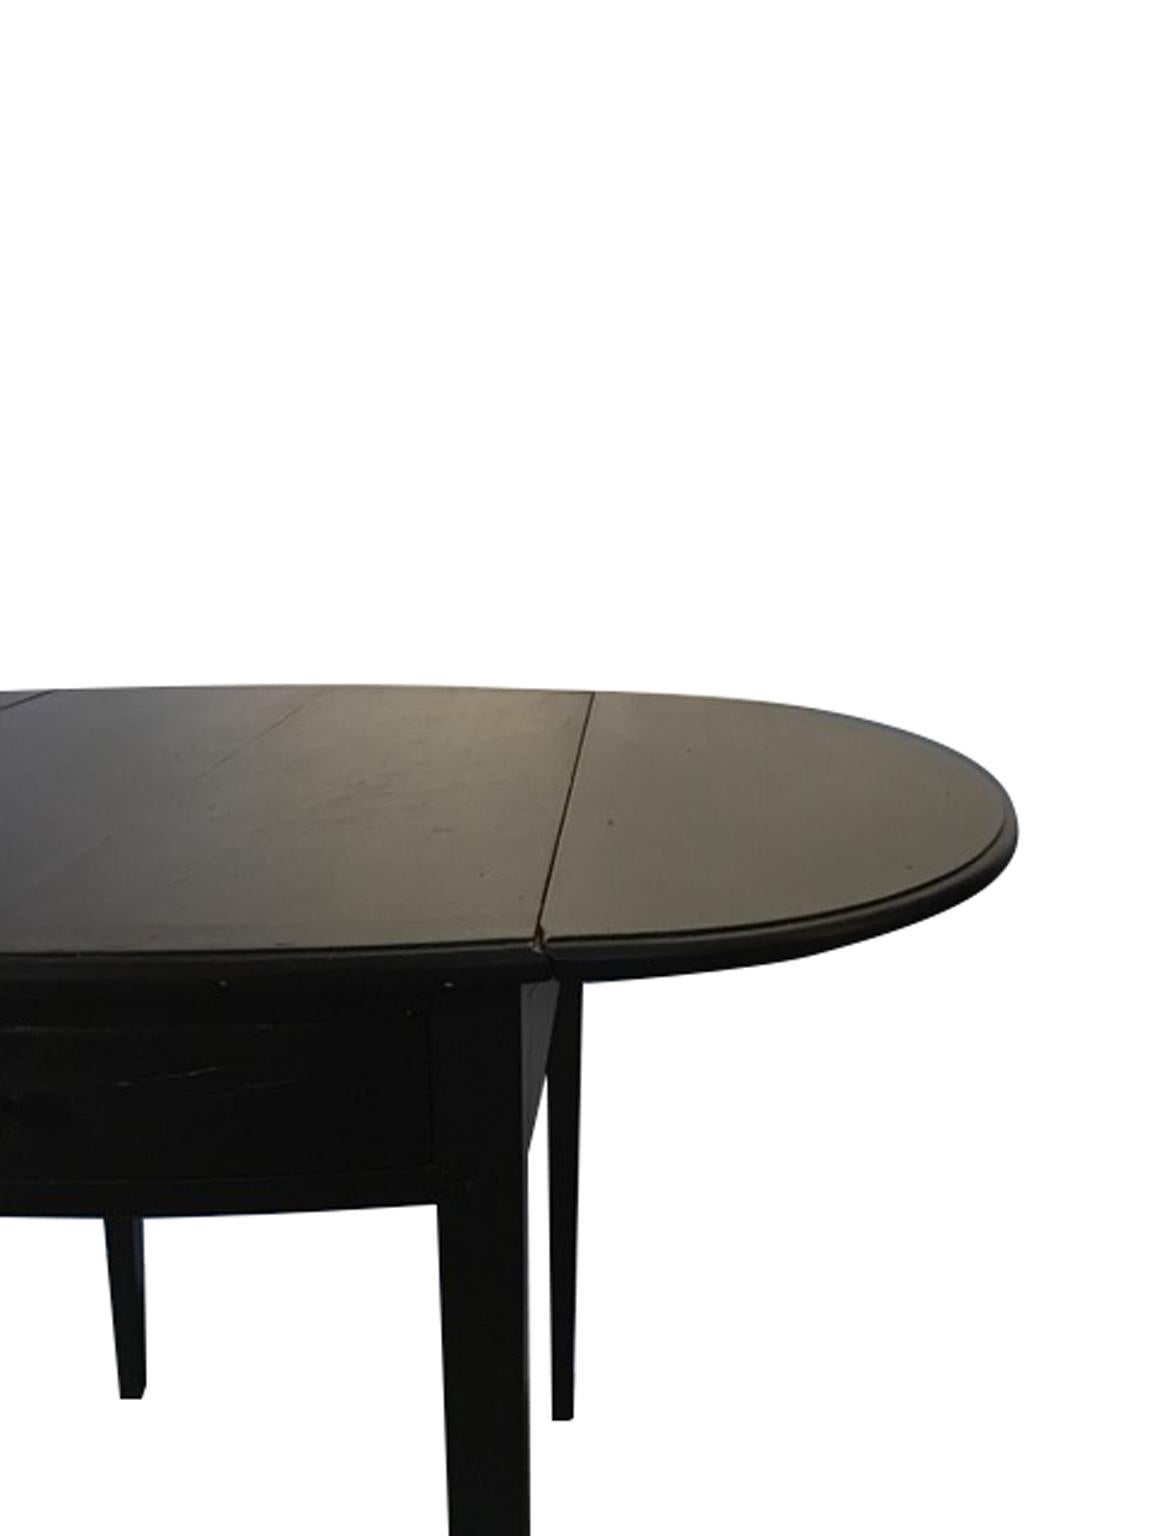 This useful and elegant table has a flap on each side which can be raised and lowered as required. 
The two drawers are fakes. The hand crafted finish reproduce the appearance of an antique piece of furniture. 

Contemporary production. Totally made